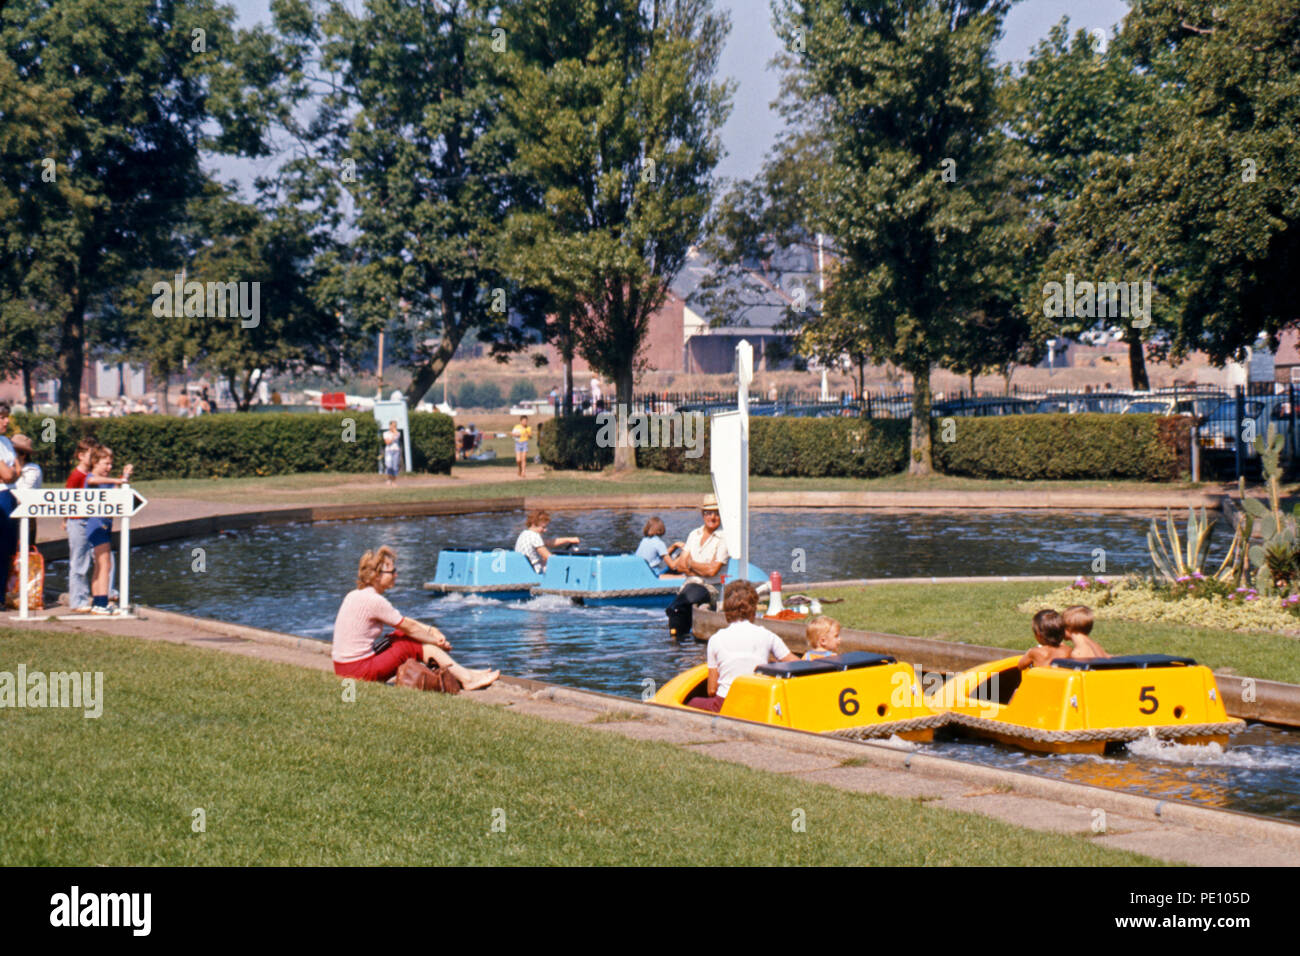 Young mother watching children in boating lake, Nicholas Everett Park, Oulton Broad, Suffolk, England, 1975 Stock Photo